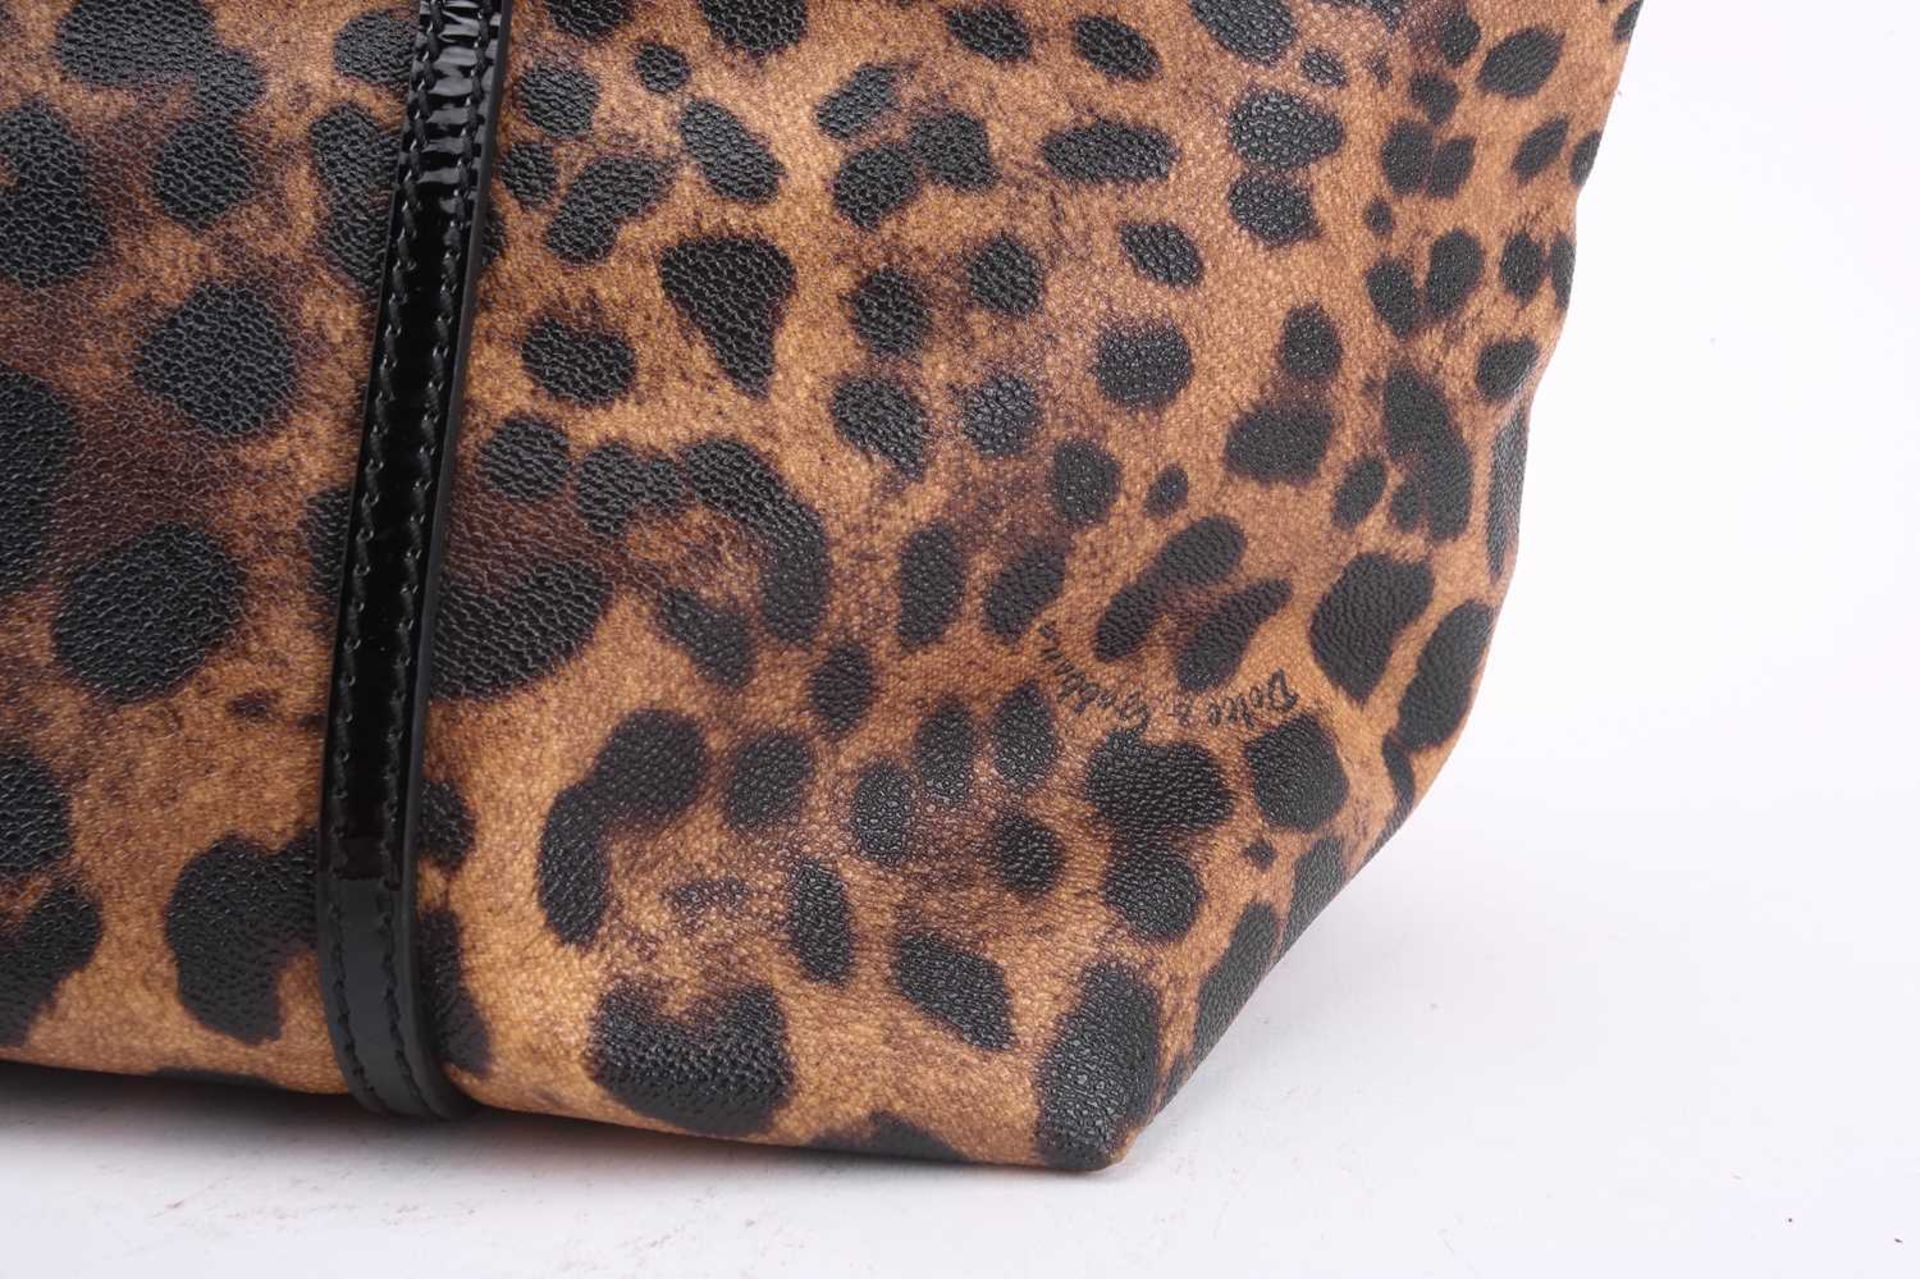 Dolce & Gabbana - a large leopard print 'Escape' shopper tote with black patent leather trims and - Image 3 of 13